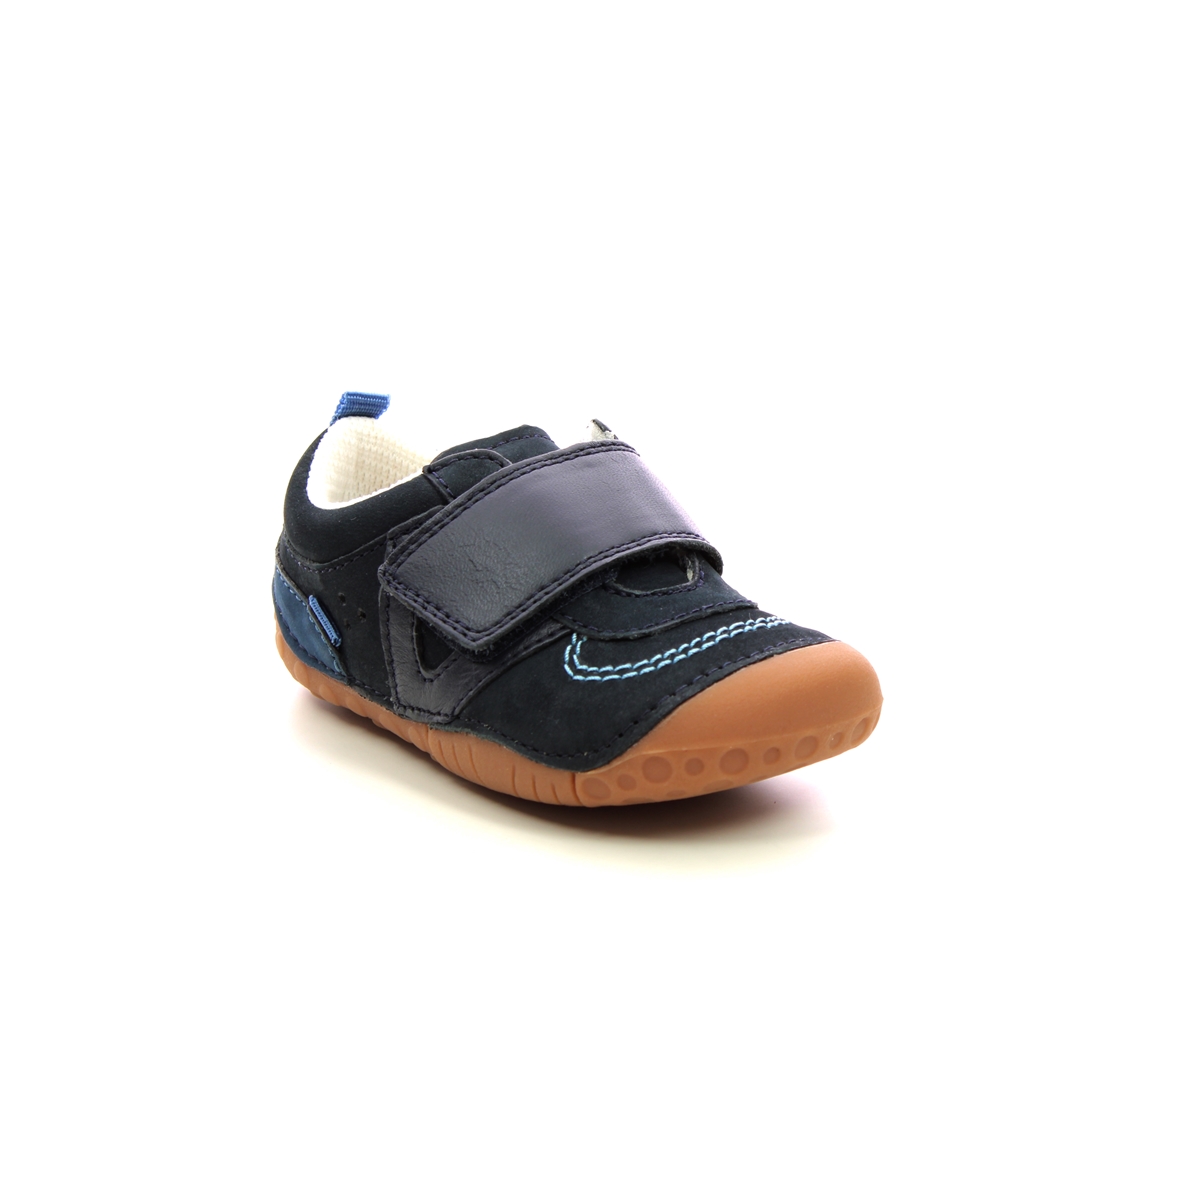 Start Rite Shuffle 1v Navy leather Kids Boys First Shoes 0786-97G in a Plain Leather in Size 4.5